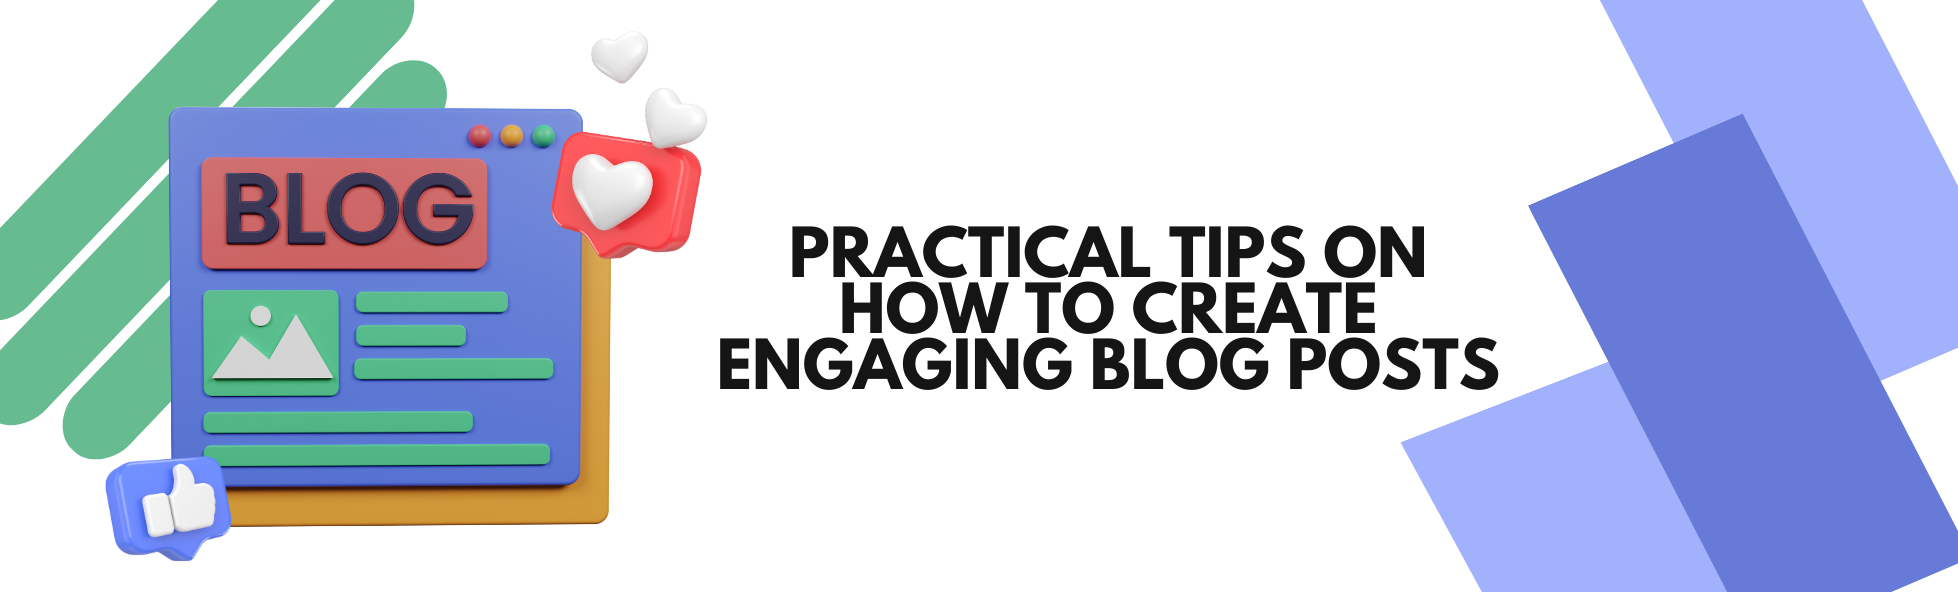 practical tips on how to create engaging blog posts